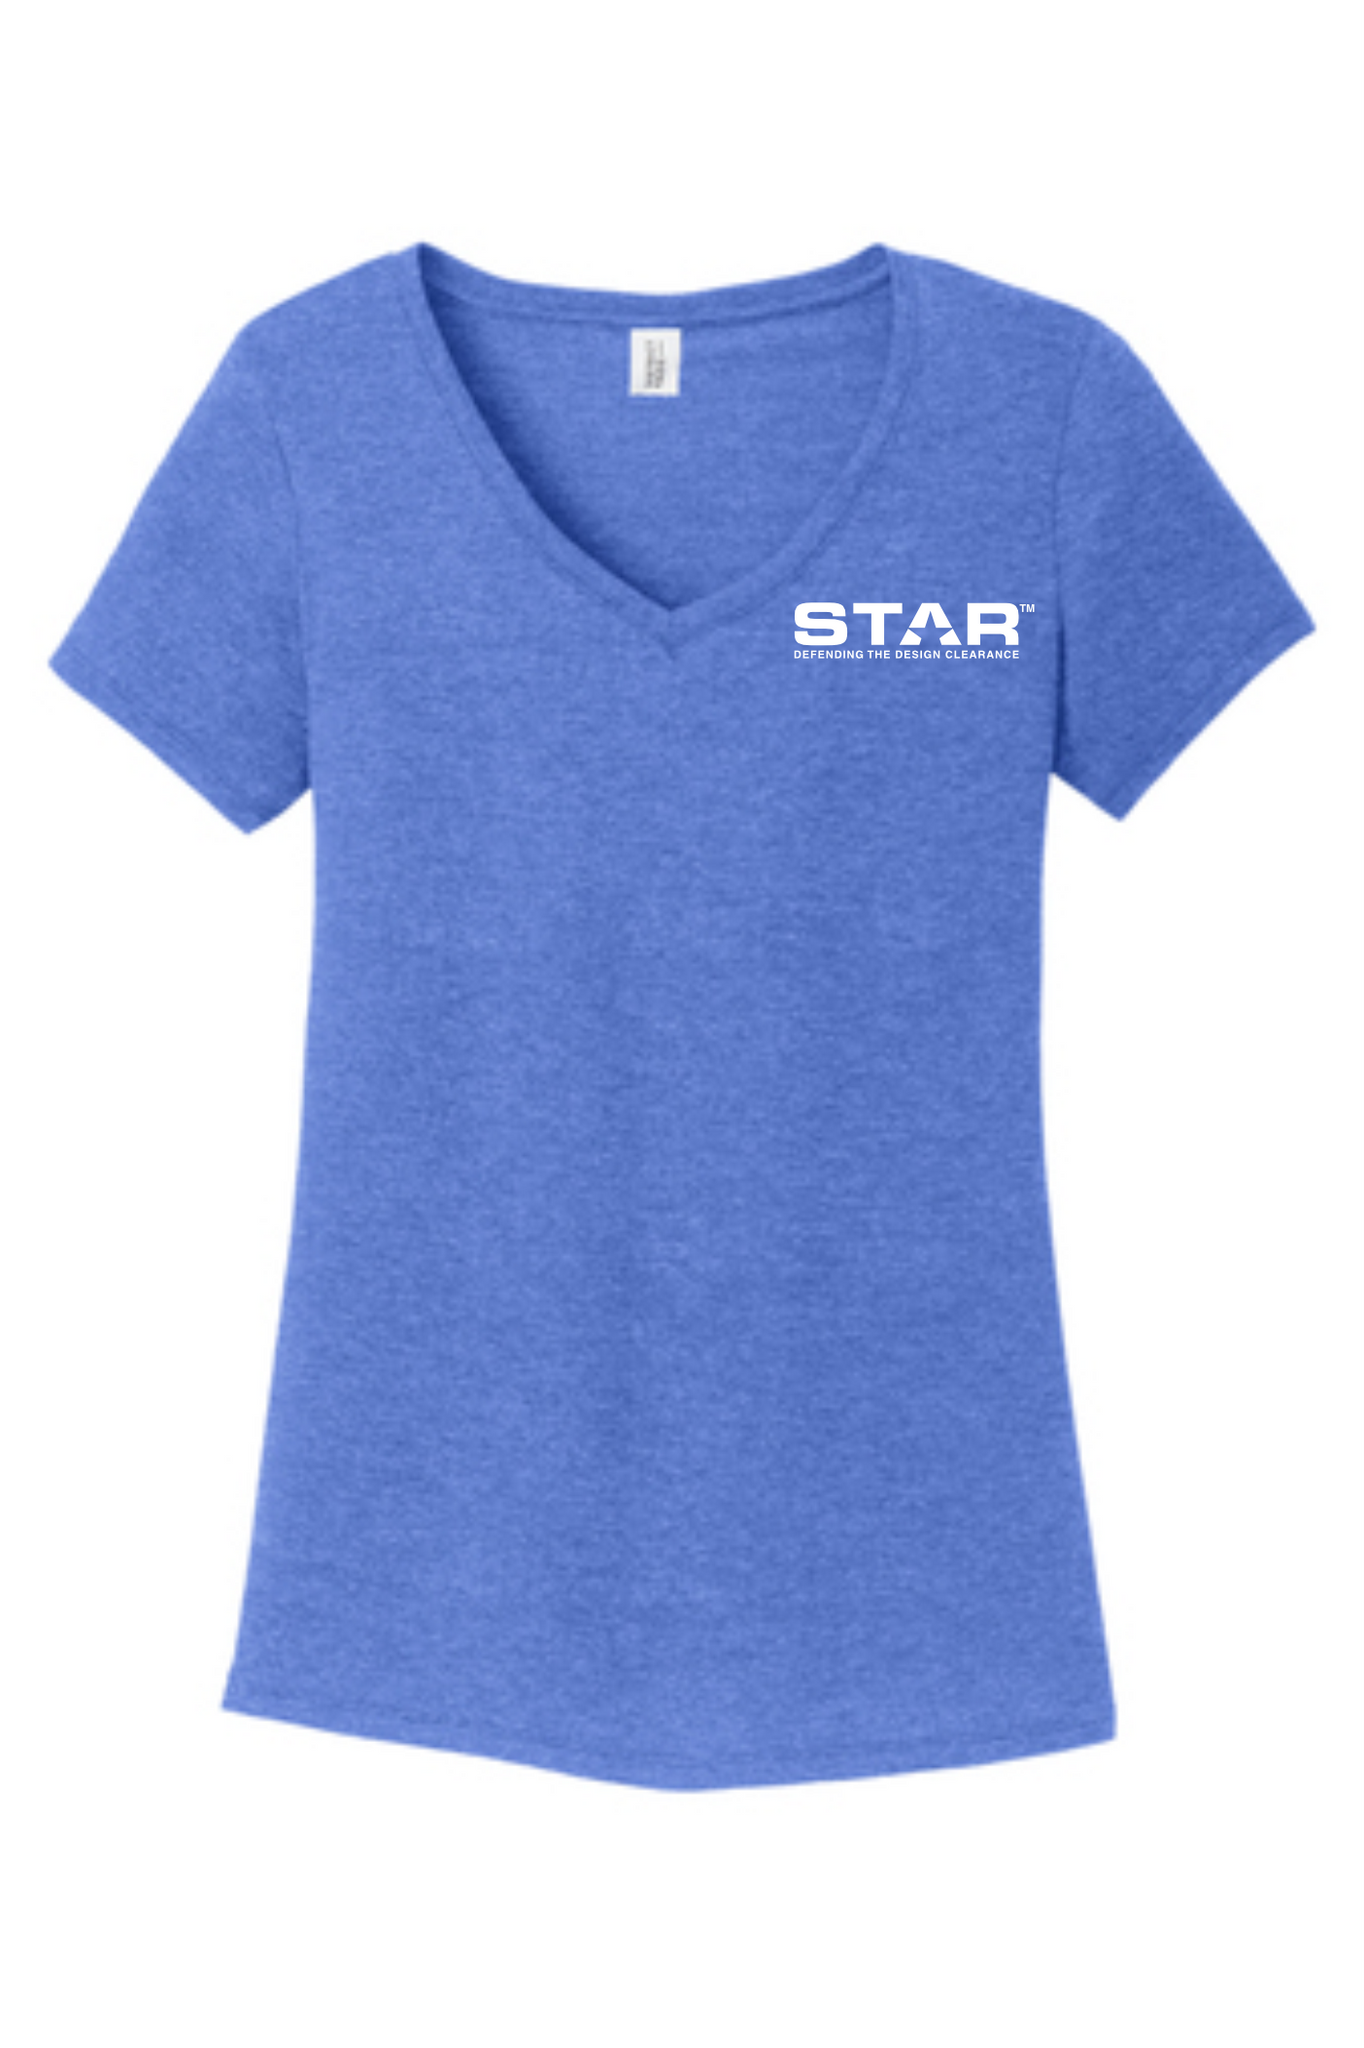 Star District Women's Perfect Tri V-Neck Tee